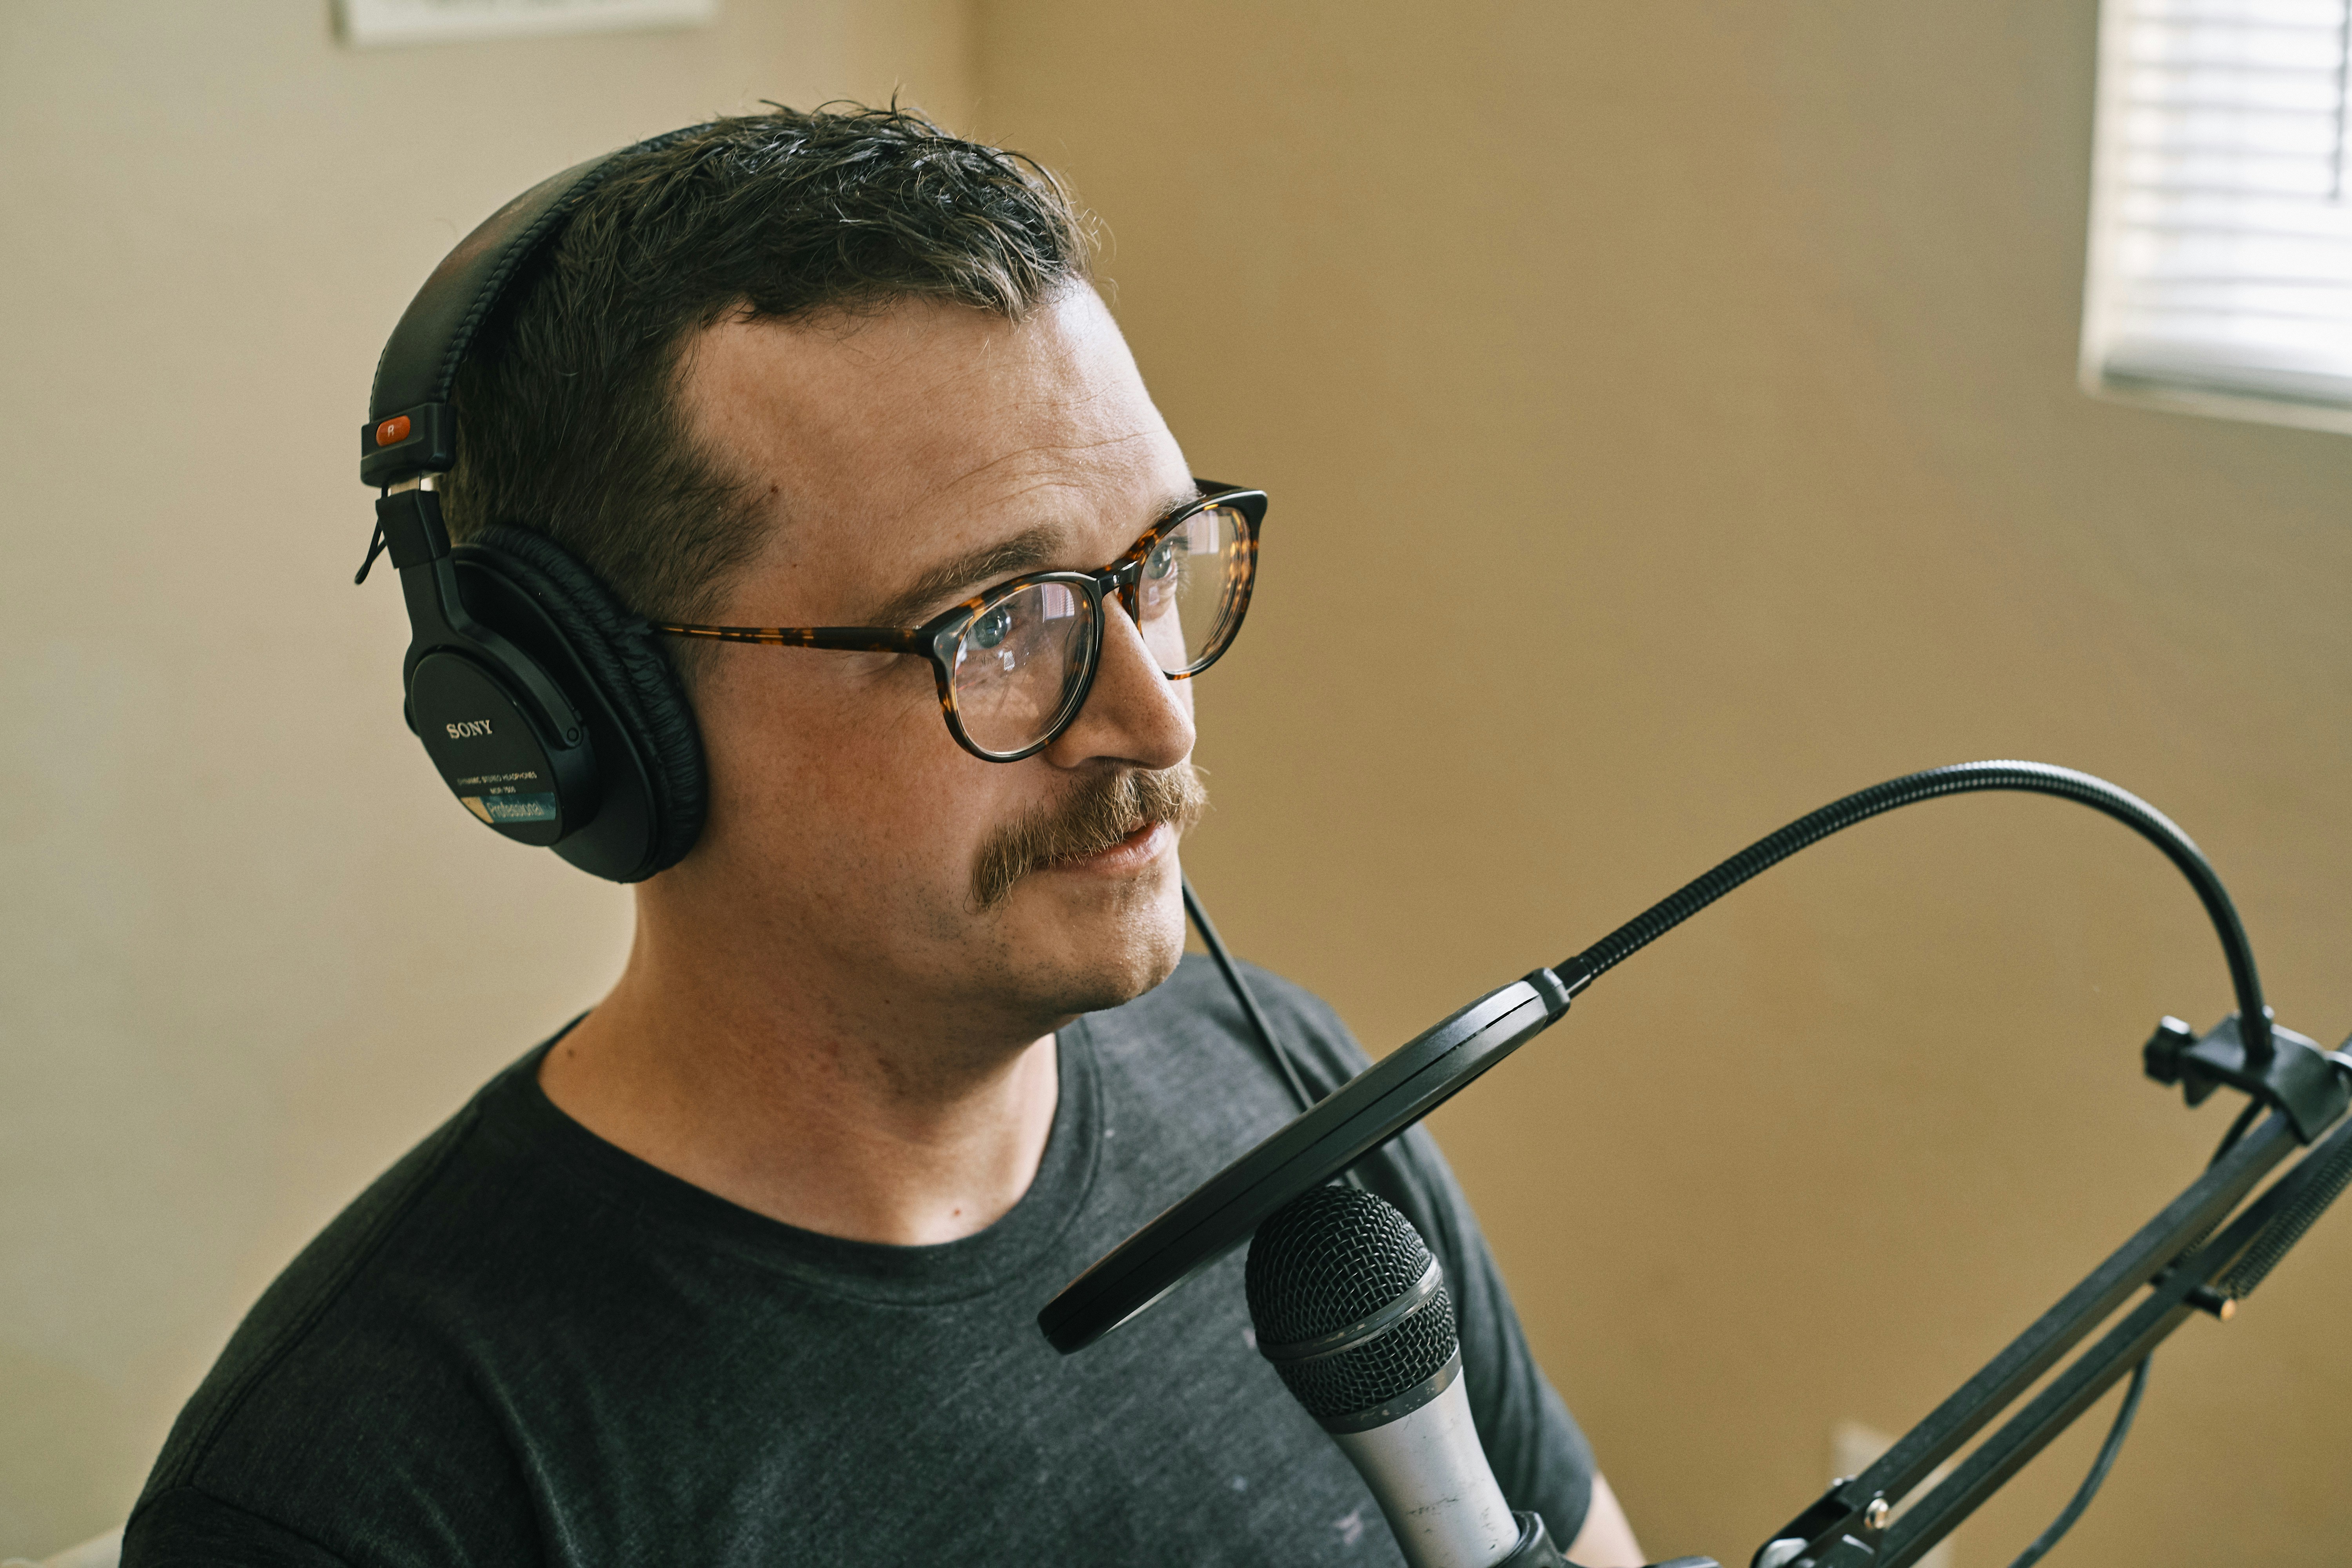 The Best Recording Software For Beginner Podcasters